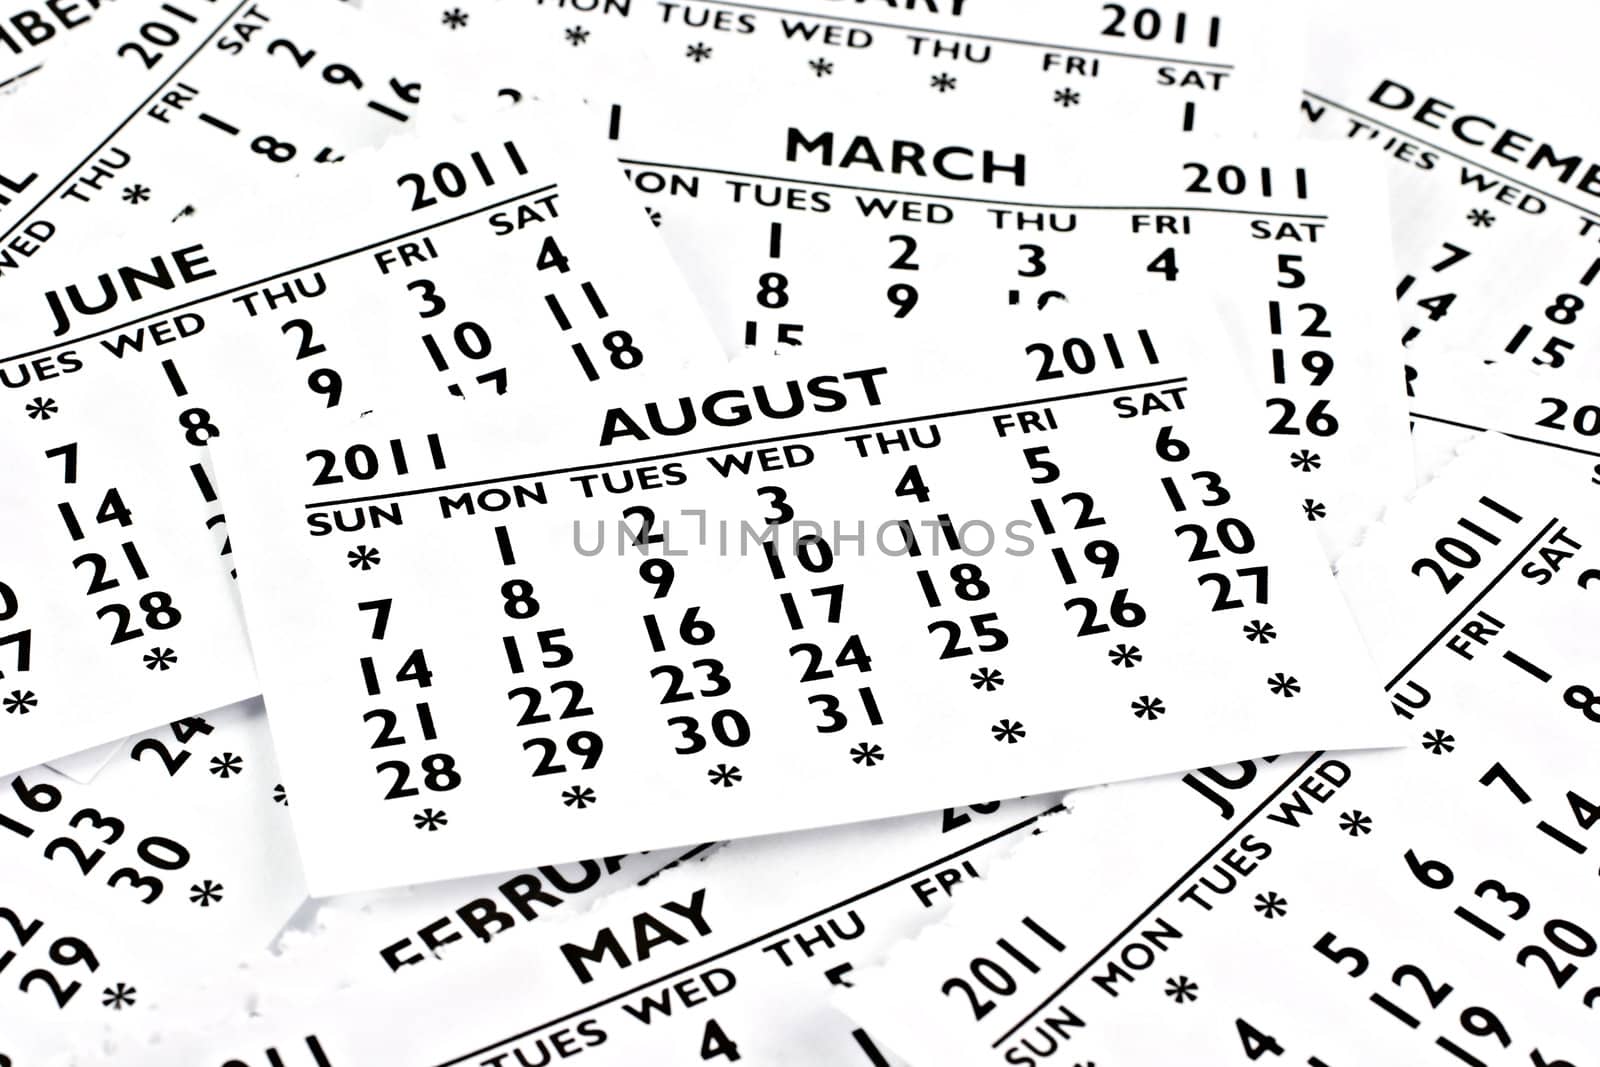 2011 calendar exteriors of the page. Month of August, the site is at the very top.